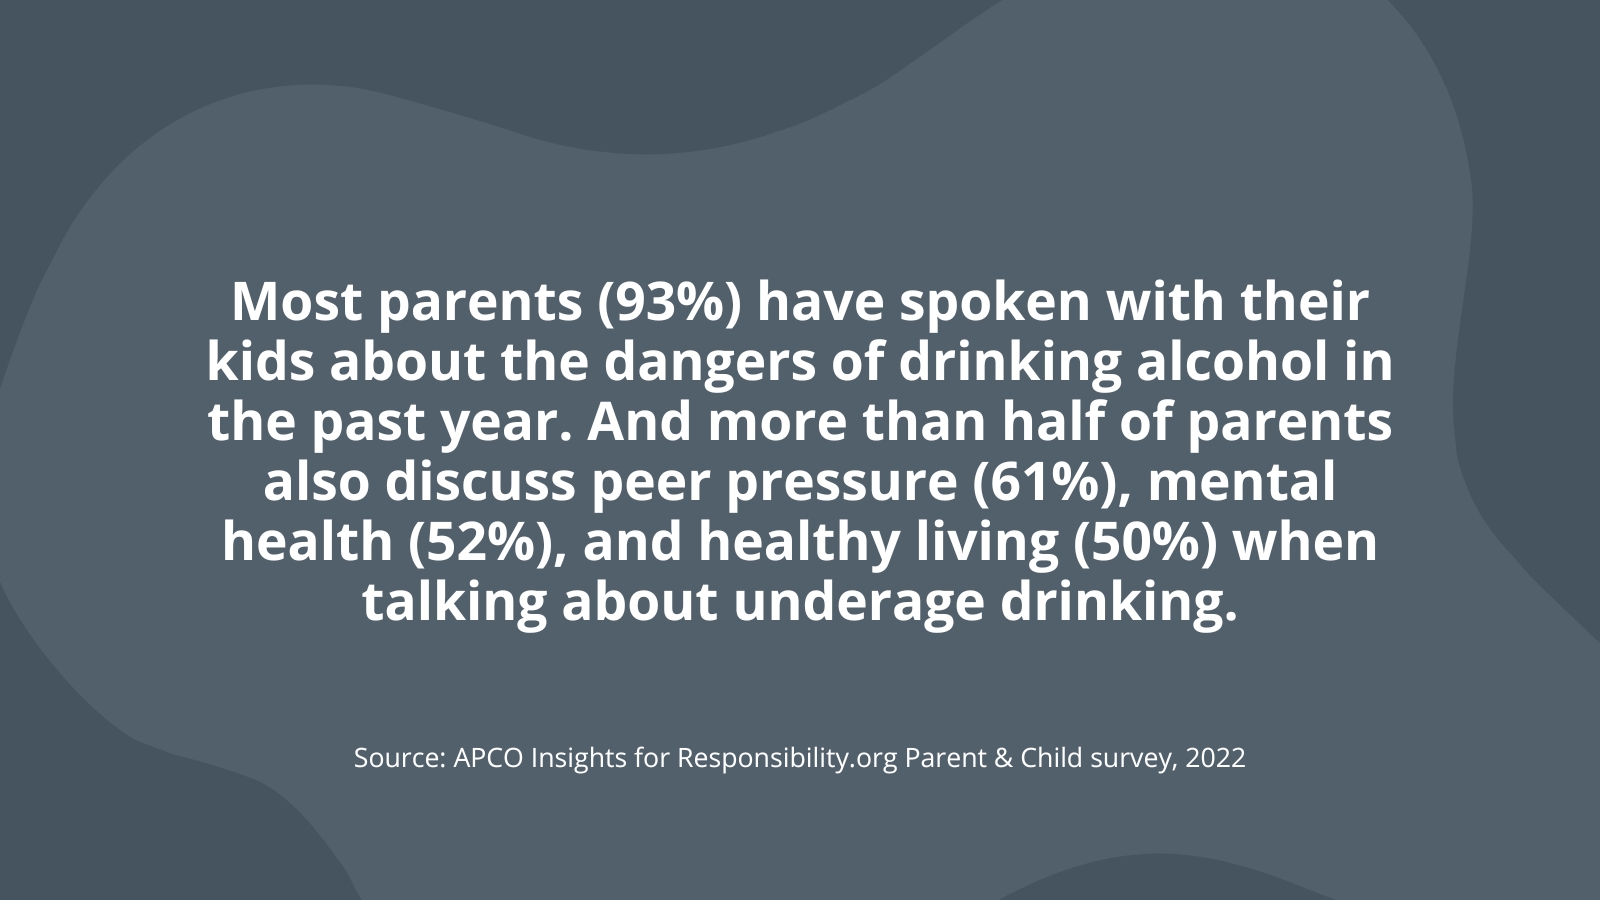 Most parents (93%) have spoken with their kids about the dangers of drinking alcohol in the past year. And more than half of parents also discuss peer pressure (61%), mental health (52%), and healthy living (50%) when talking about underage drinking.